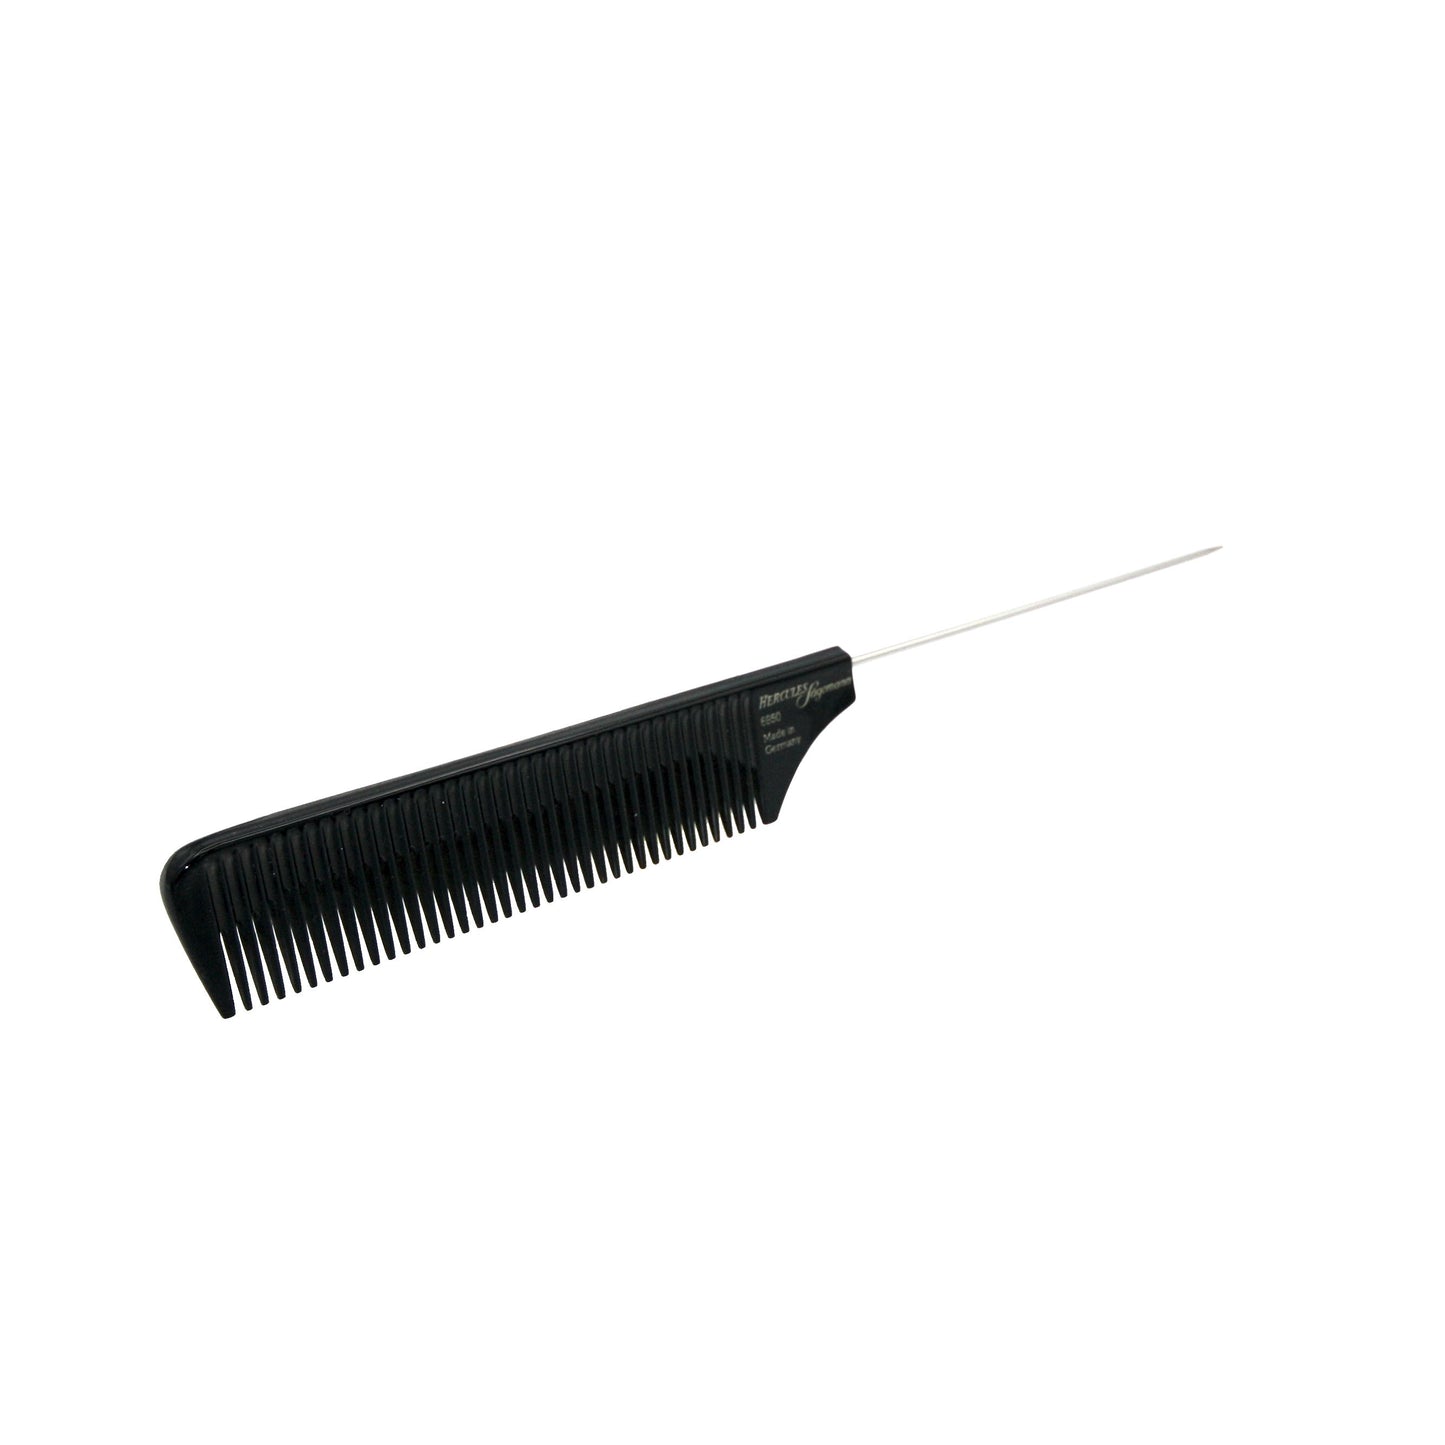 Hard Rubber, 9in Pin Tail Course Tooth Comb, Hercules Sagemann 6950